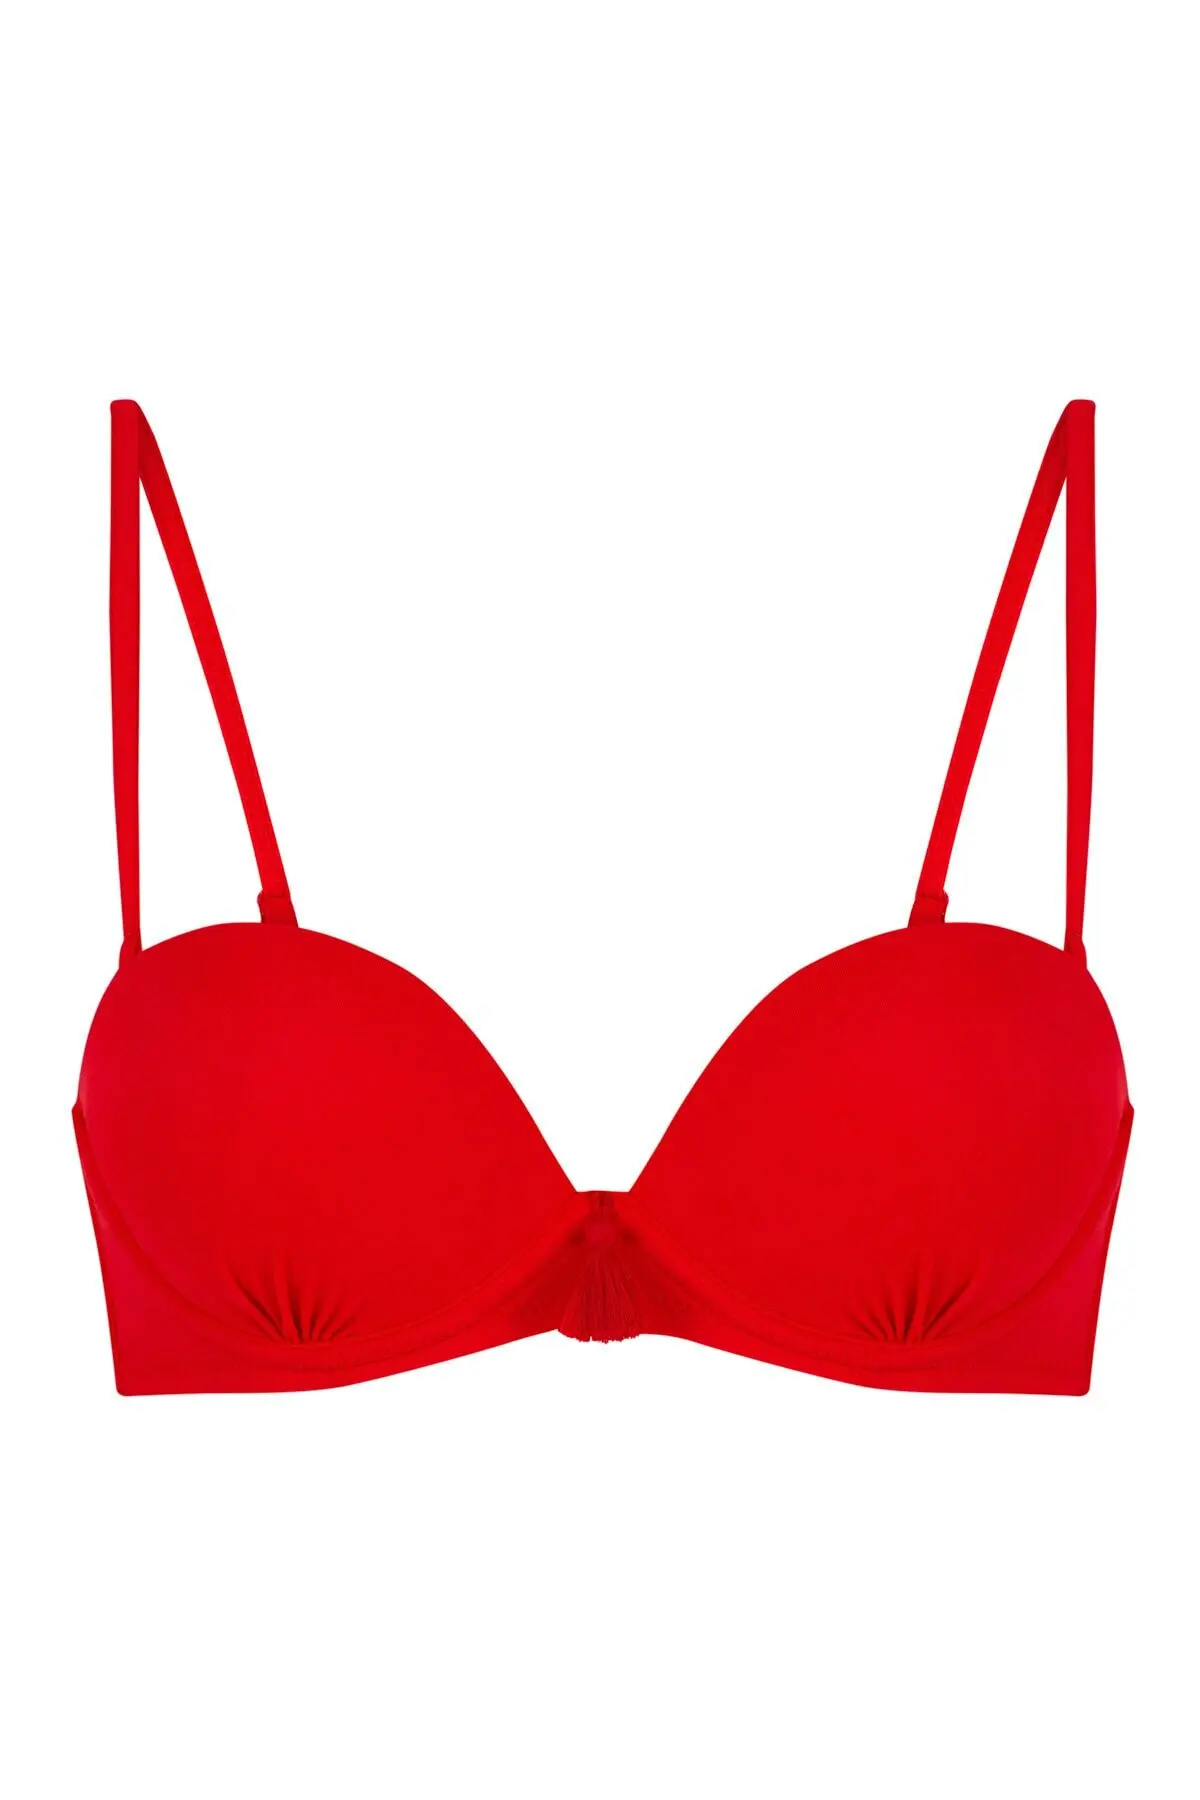 LOOK FOR YOUR WONDERFUL NIGHTS WITH ITS STUNNING Women's Red Basic Super Sexy Bikini Top FREE  SHIPPING